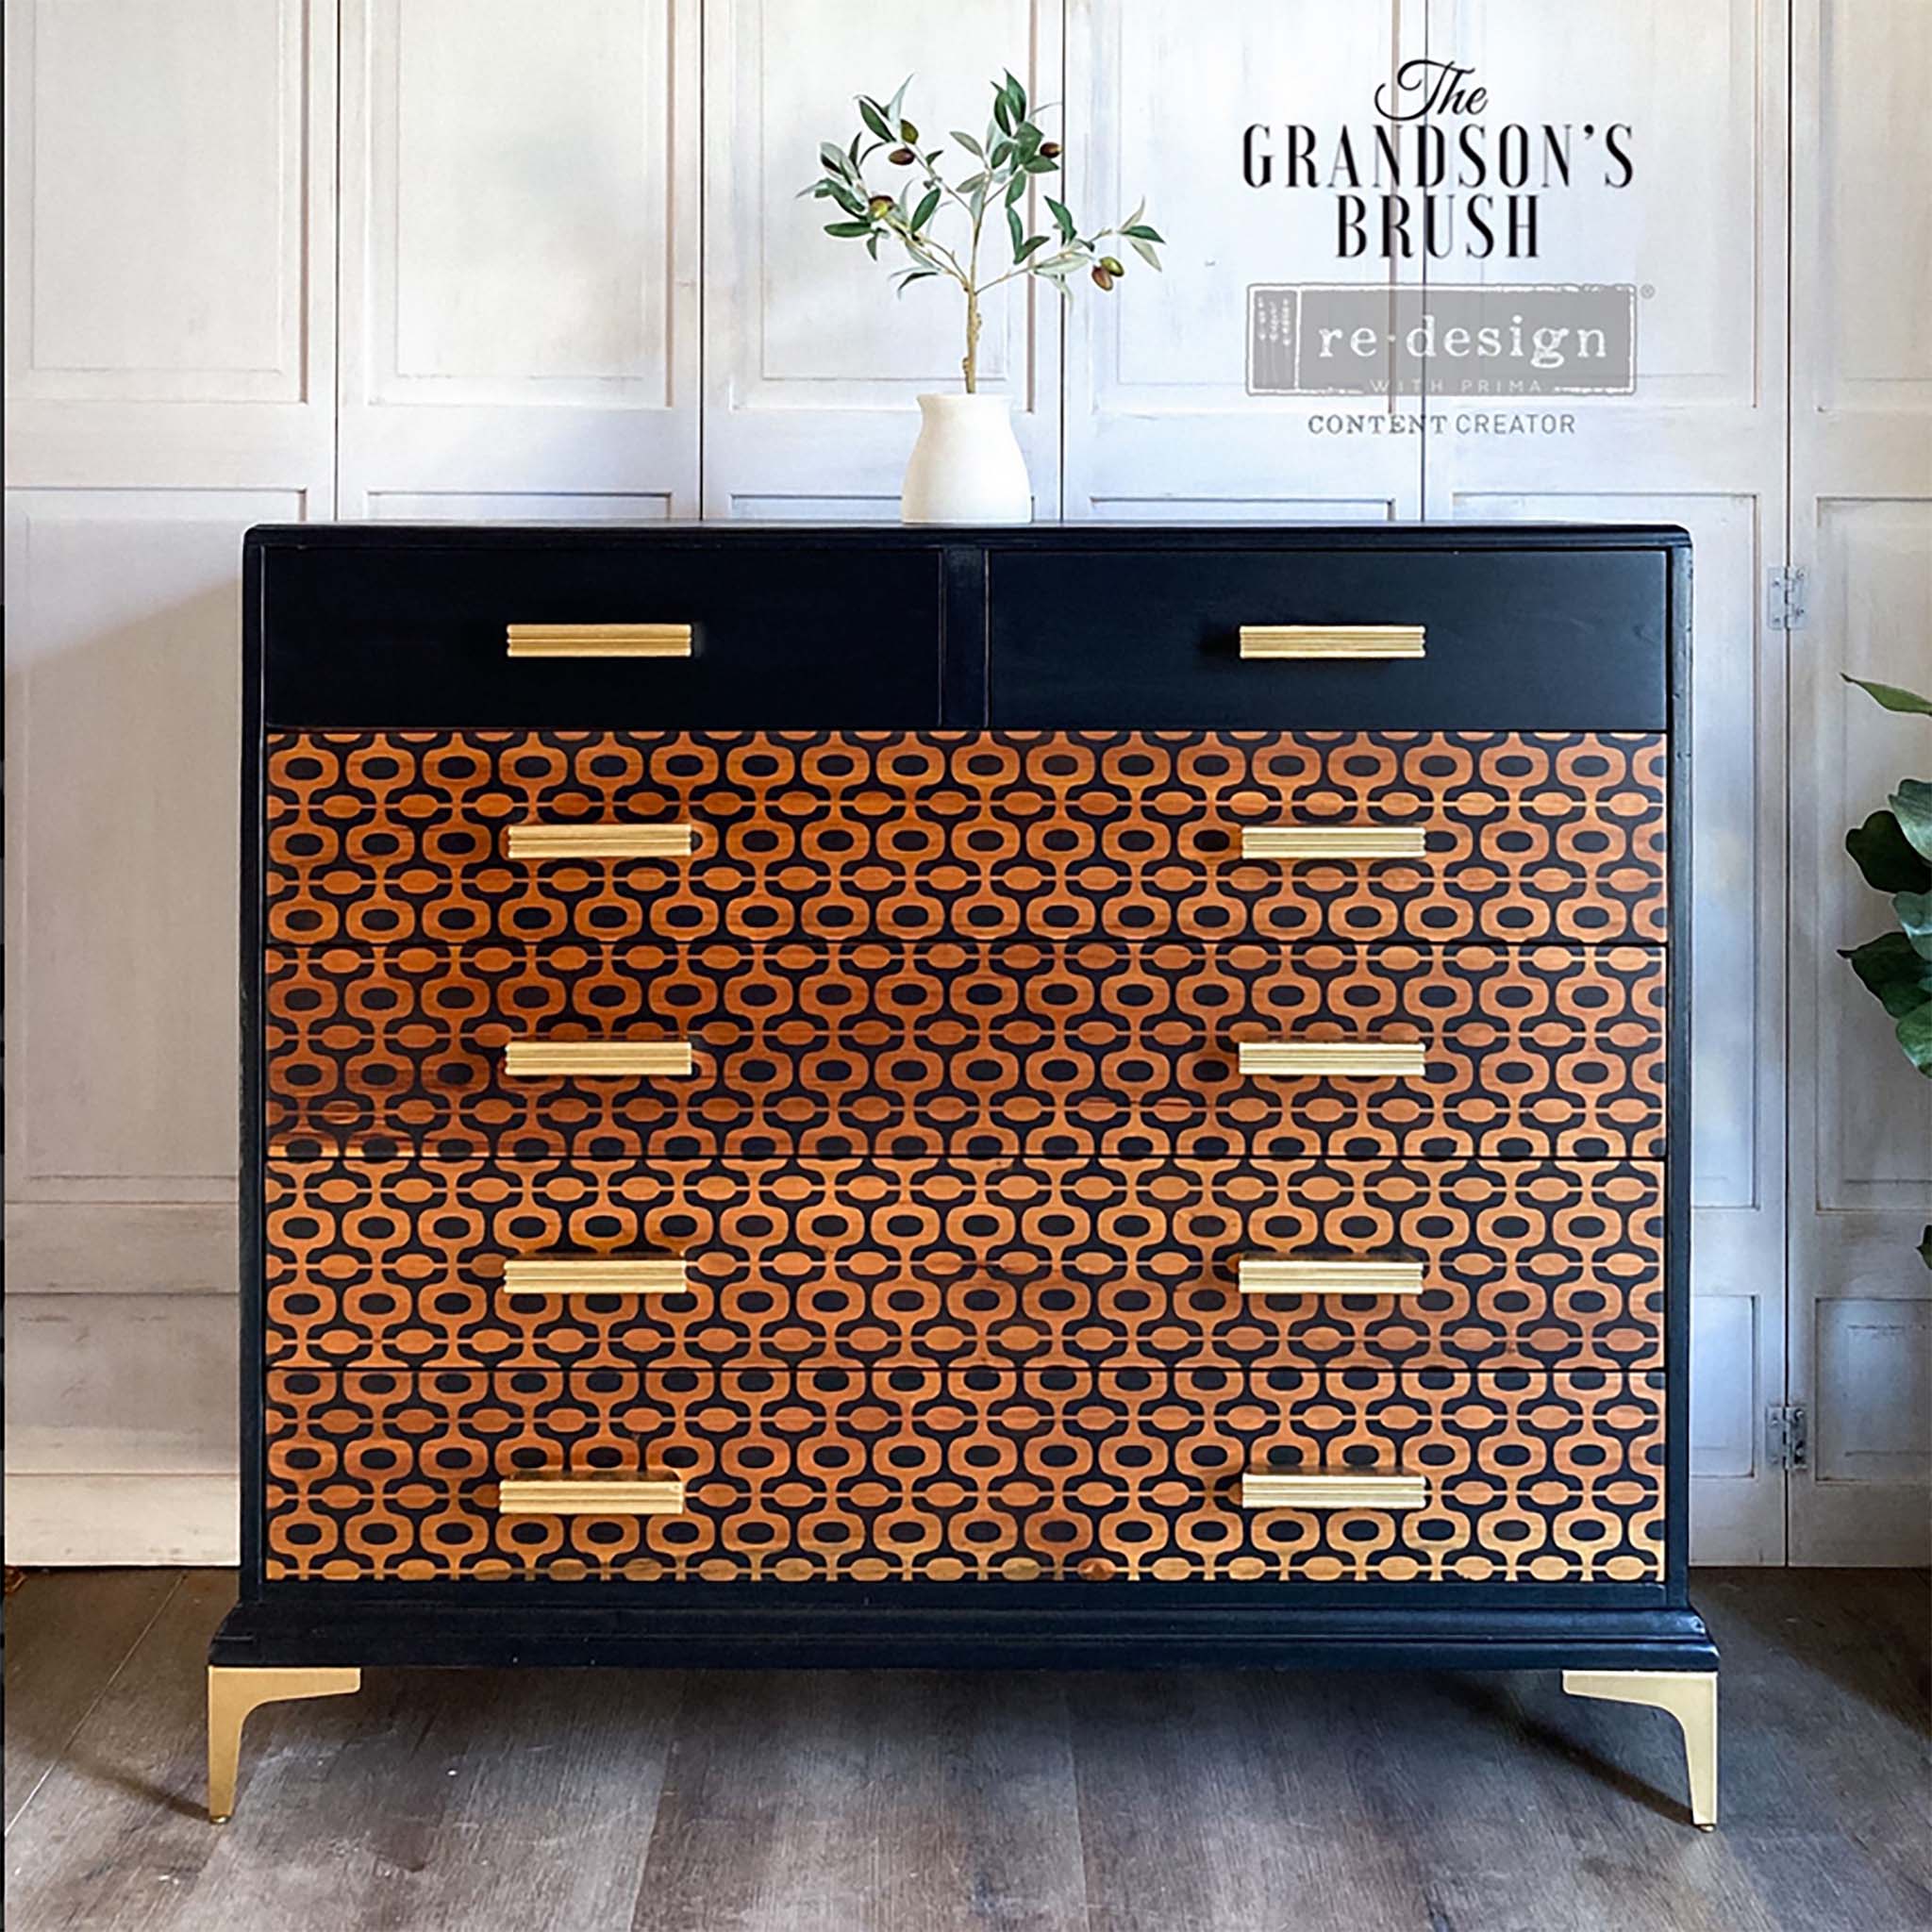 A vintage dresser refurbished by The Grandson's Brush is painted black with natural wood stain on all but the top 2 drawers and features ReDesign with Prima's Midcentury Vibes stencil in black on the natural stained drawers.